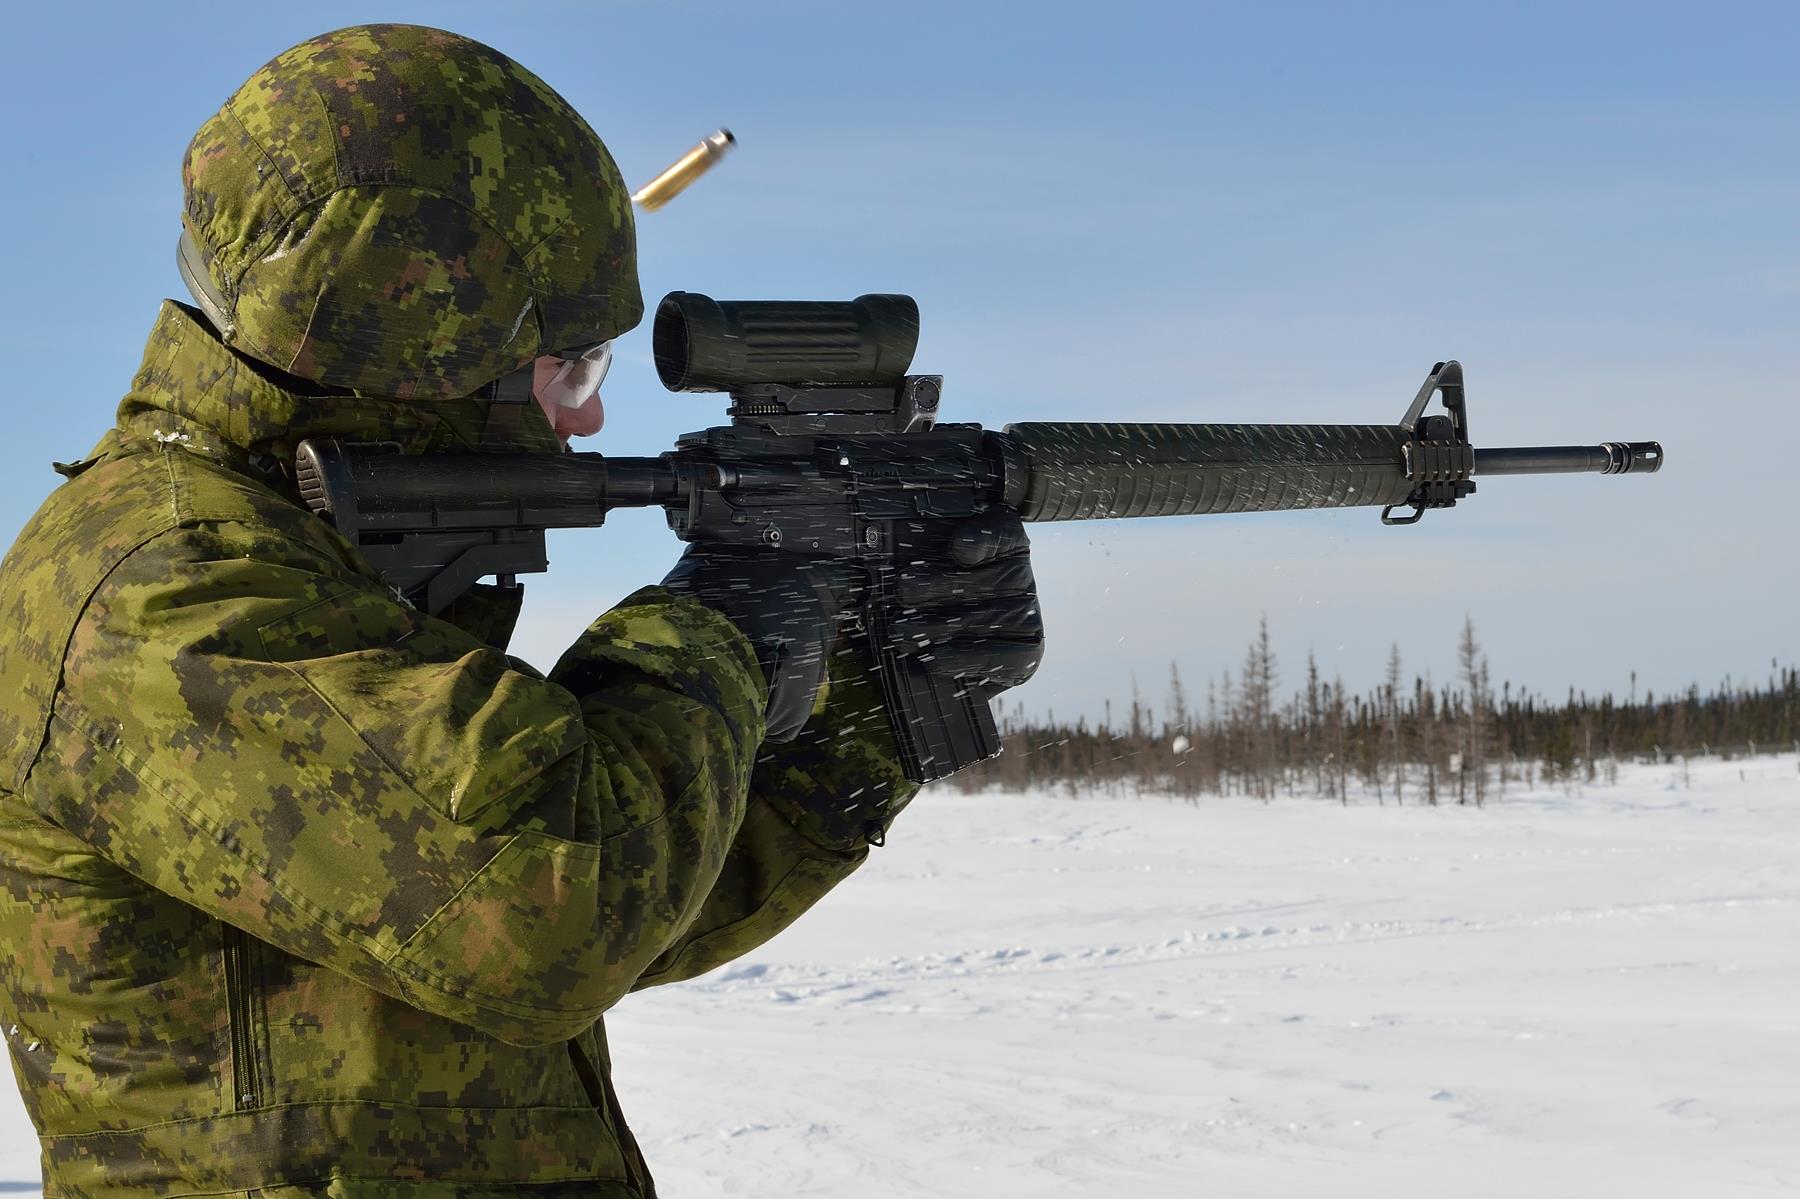  Canadian  Army  on Twitter Target practice with the C7 